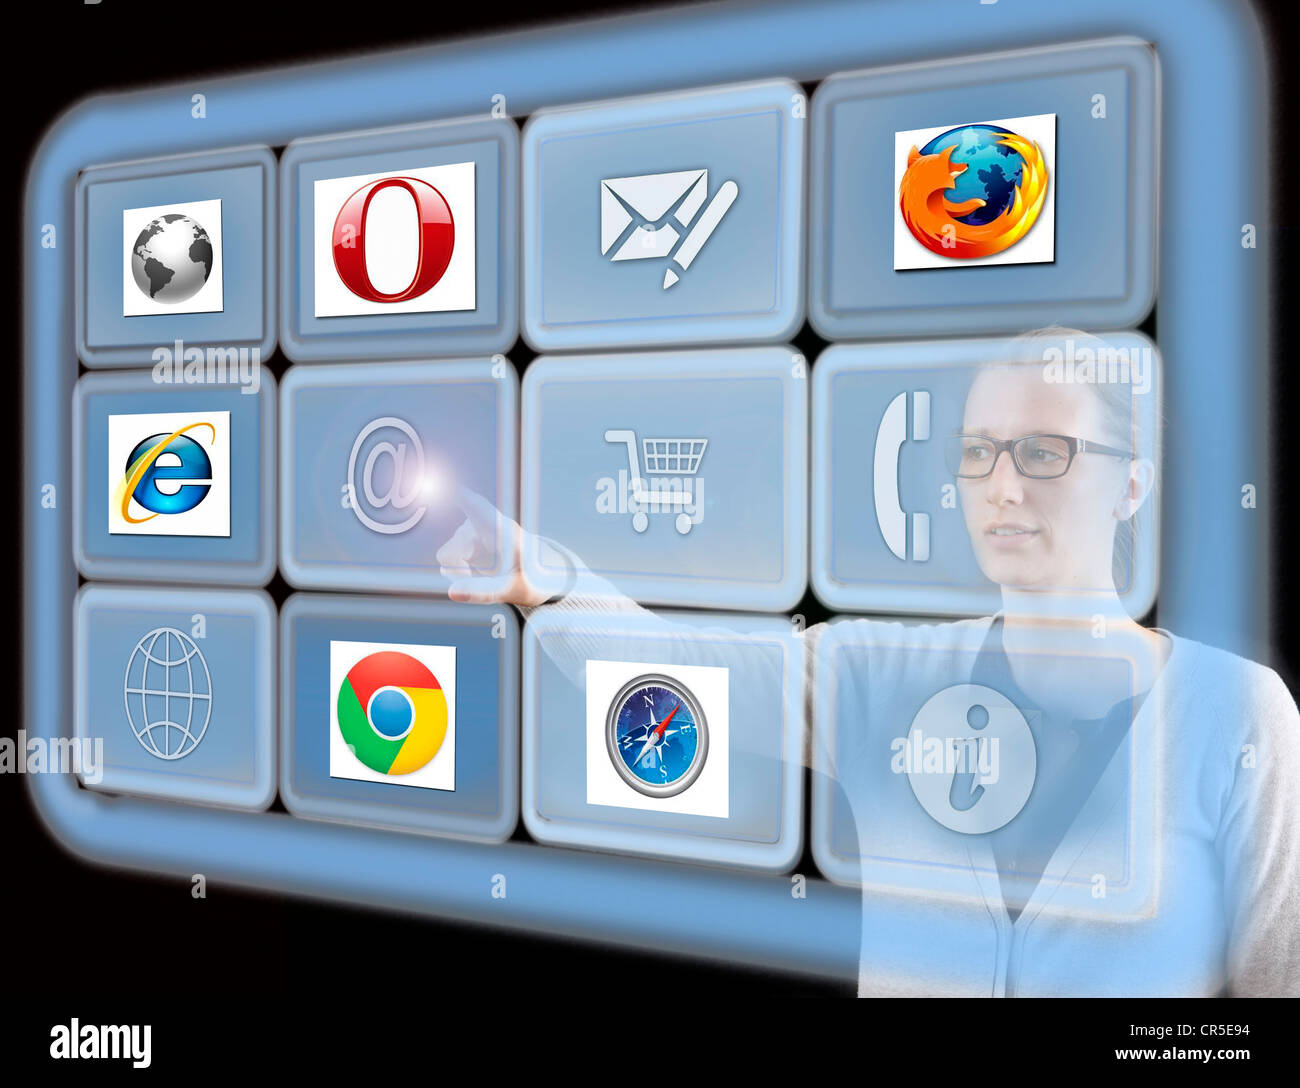 Virtual screens, touch screens. Different types of browsers, user interface for the Internet. Symbolic Image. Stock Photo